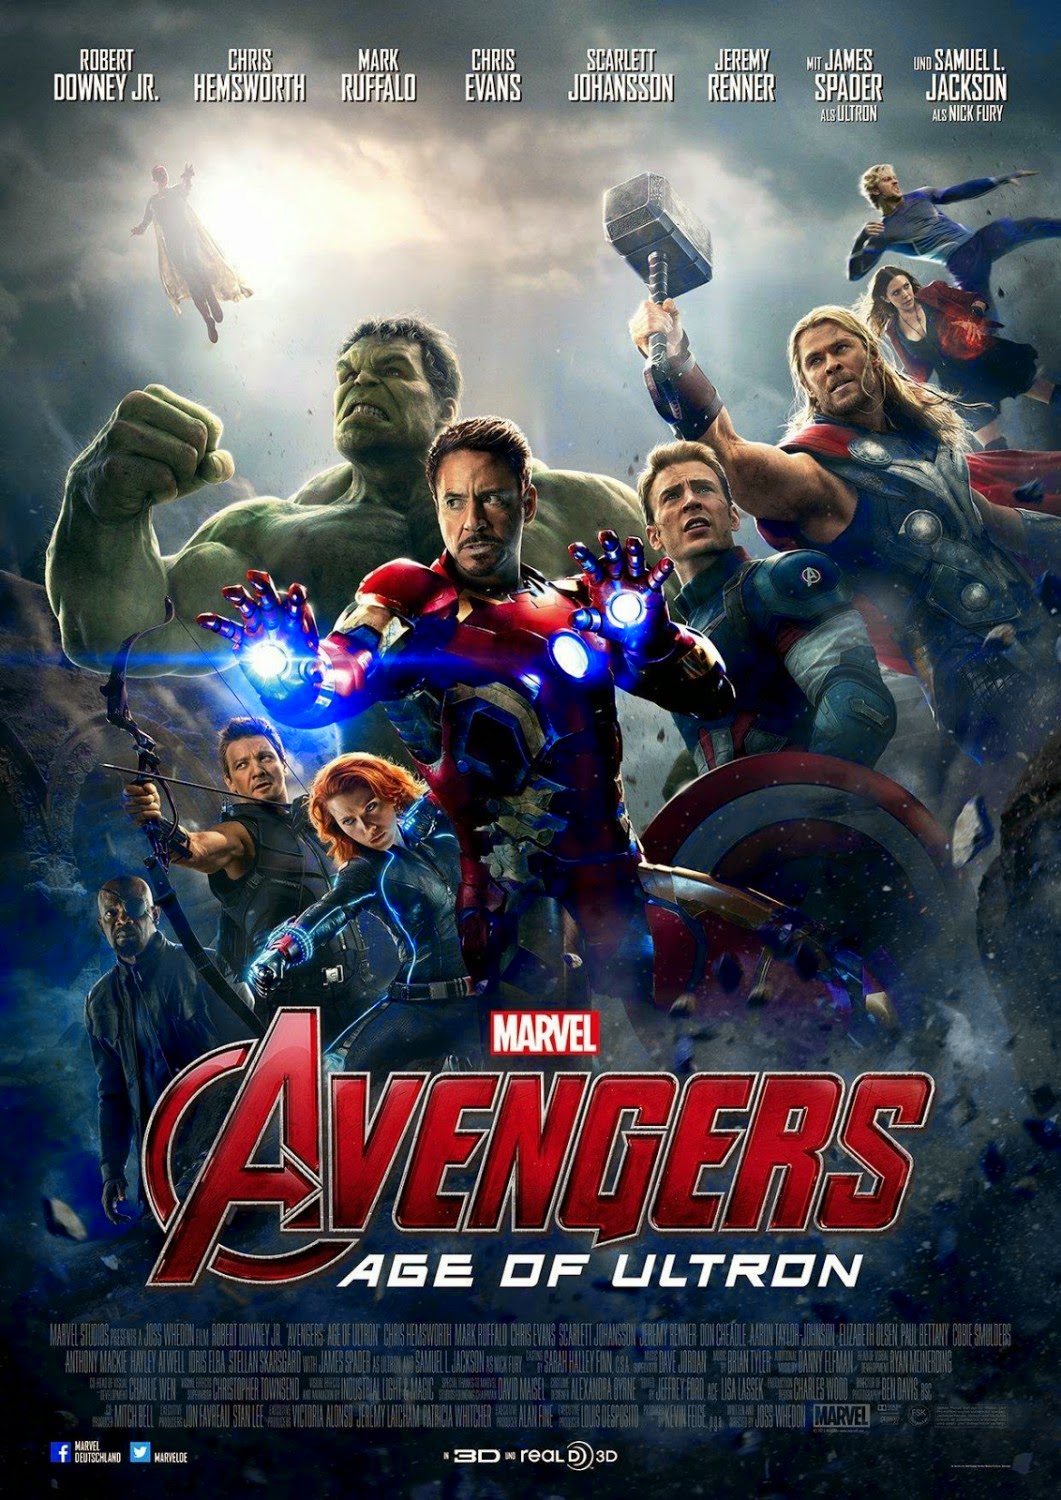 Avengers Age of Ultron (2015) ses 2015 Full Movie Download